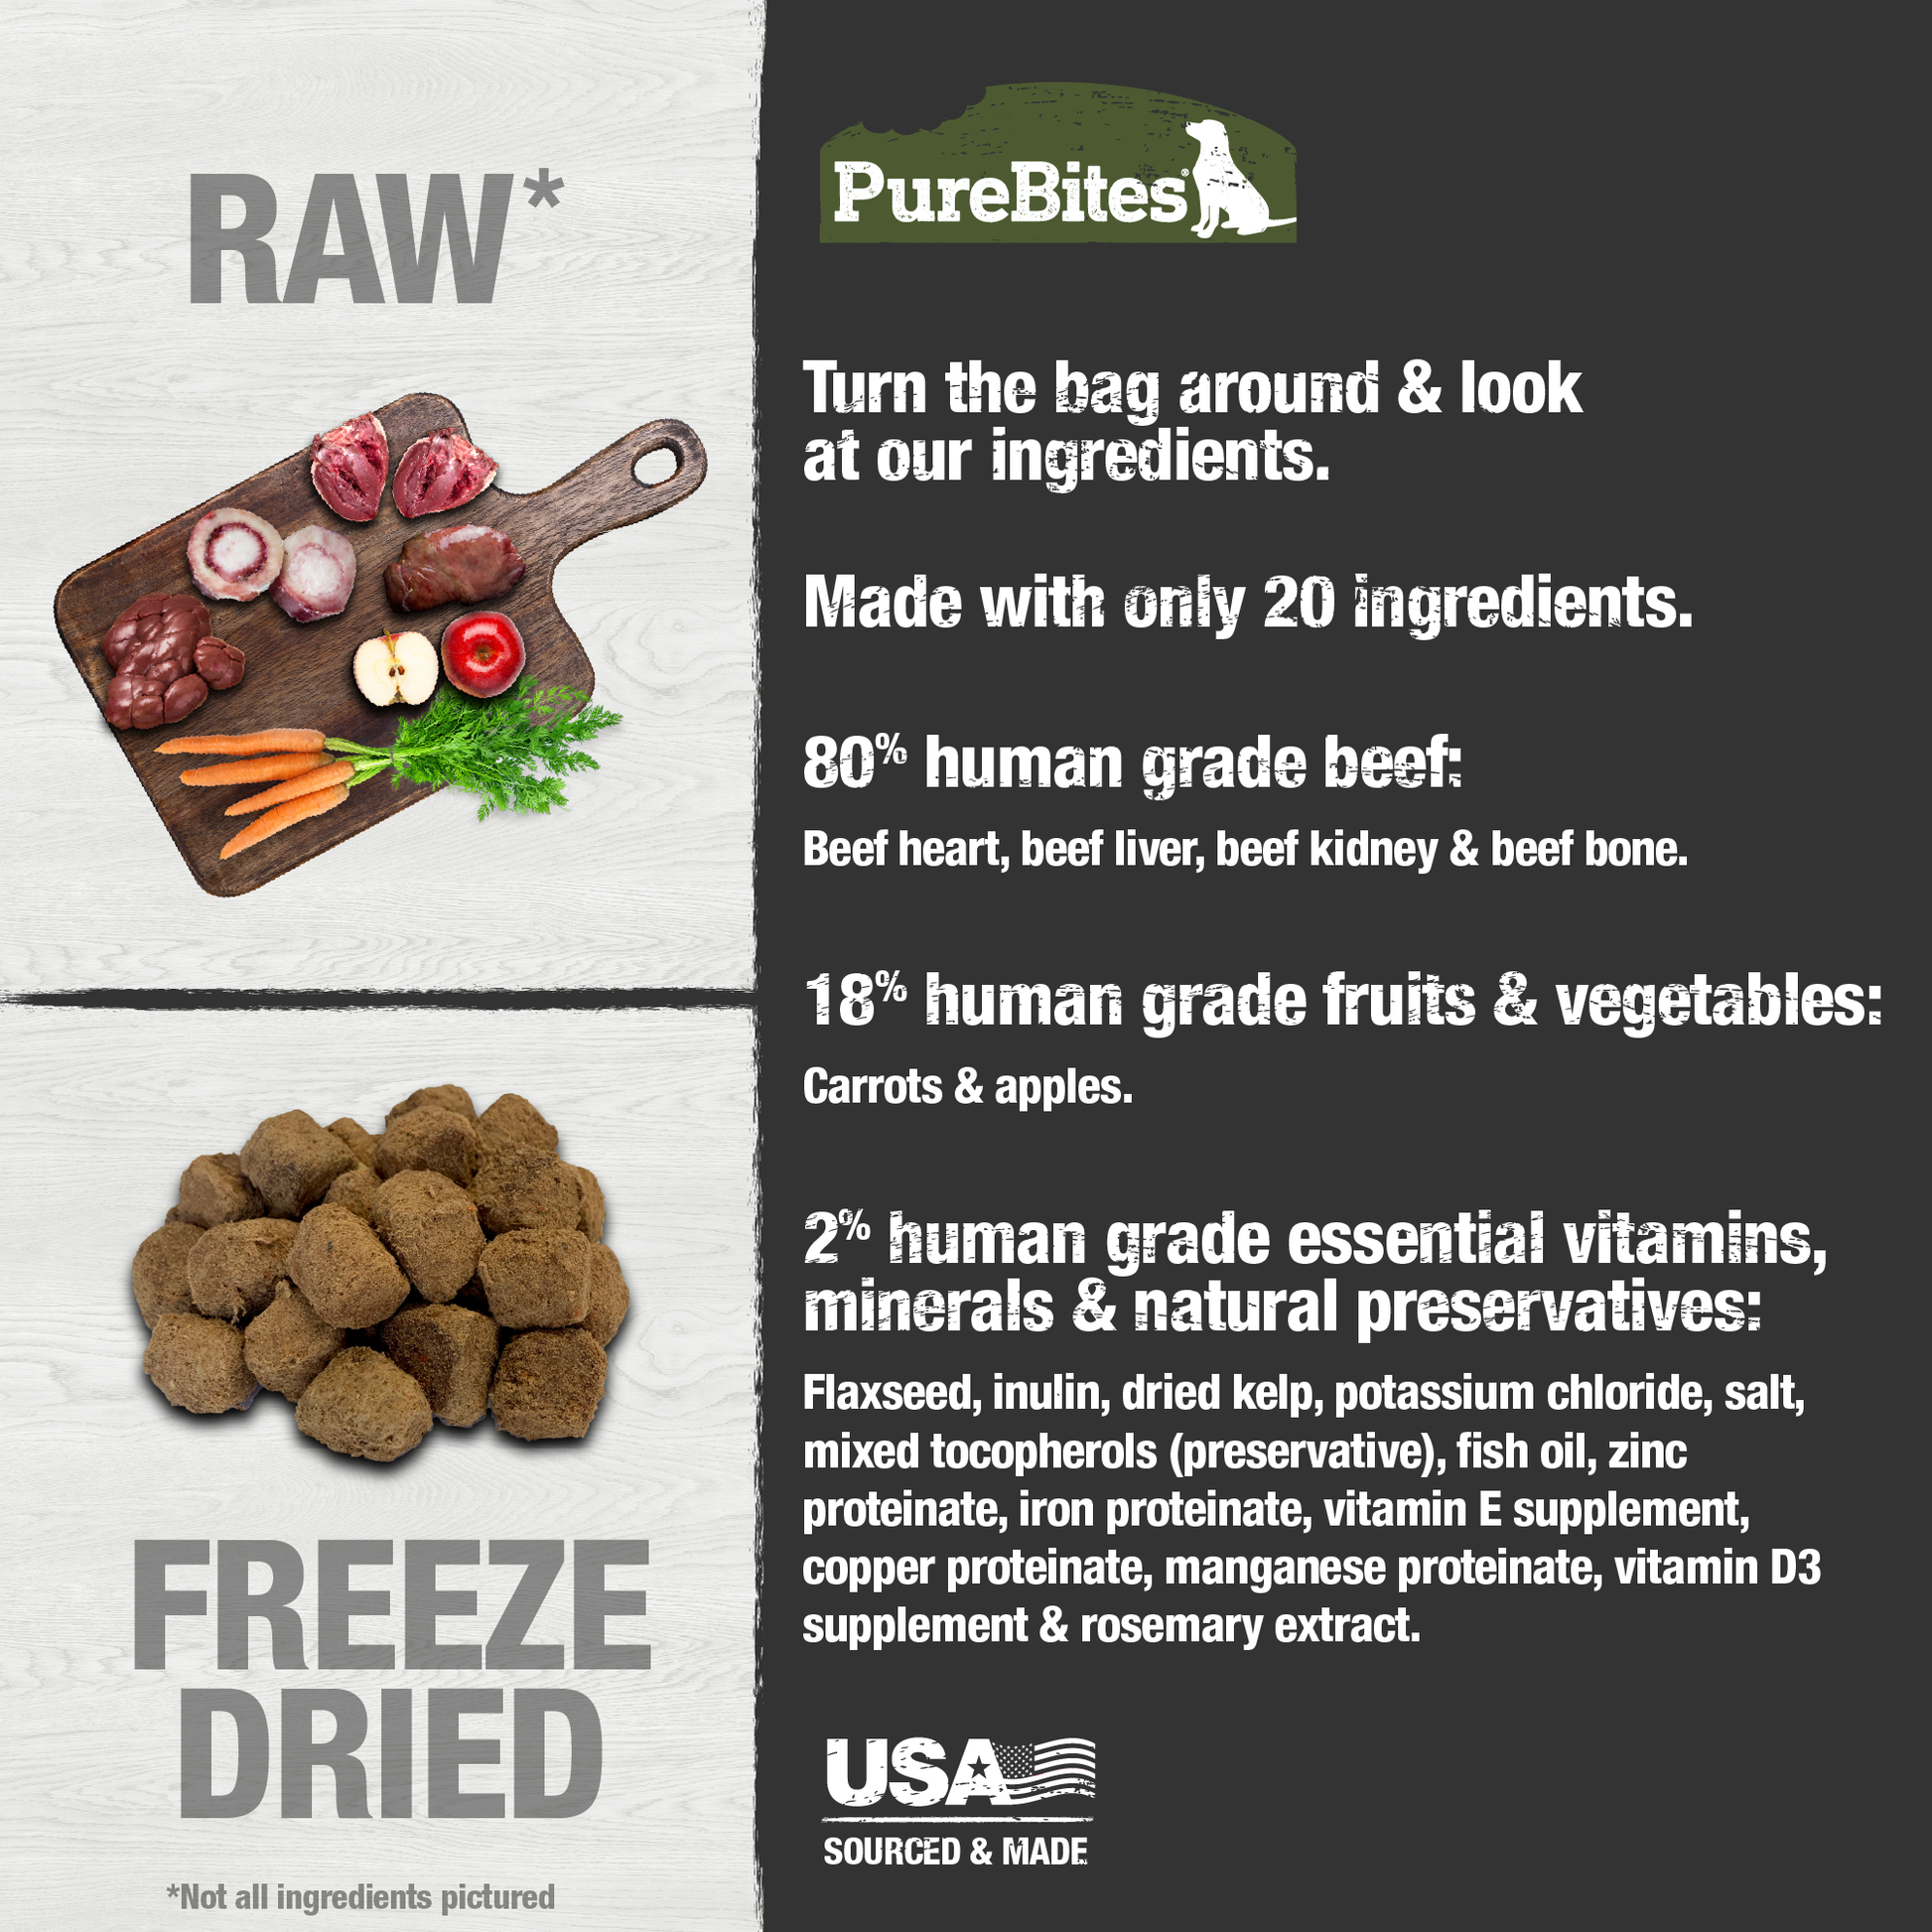 Made with only 20 Ingredients you can read, pronounce, and trust: USA sourced human grade beef heart, beef liver, beef kidney, carrot, apple, beef bone, flaxseed, inulin, dried kelp, potassium chloride, salt, mixed tocopherols (preservative), fish oil, zinc proteinate, iron proteinate, vitamin E supplement, copper proteinate, manganese proteinate, vitamin D3 supplement, rosemary extract.